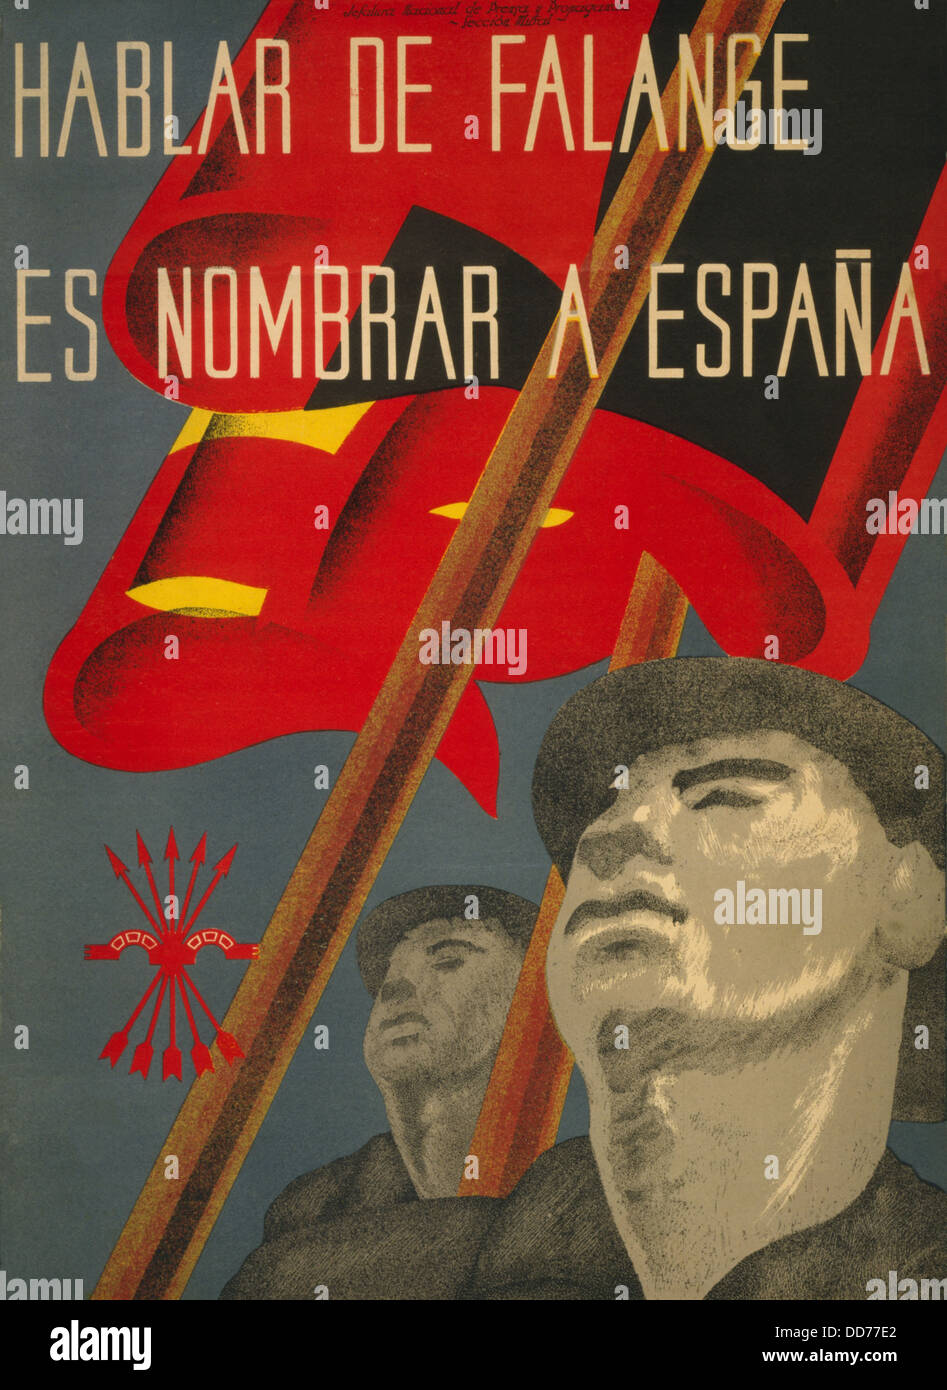 TO SPEAK OF THE FALANGE IS TO NAME SPAIN. Spanish Civil War poster presenting Nationalist propaganda. Poster depicts two men Stock Photo